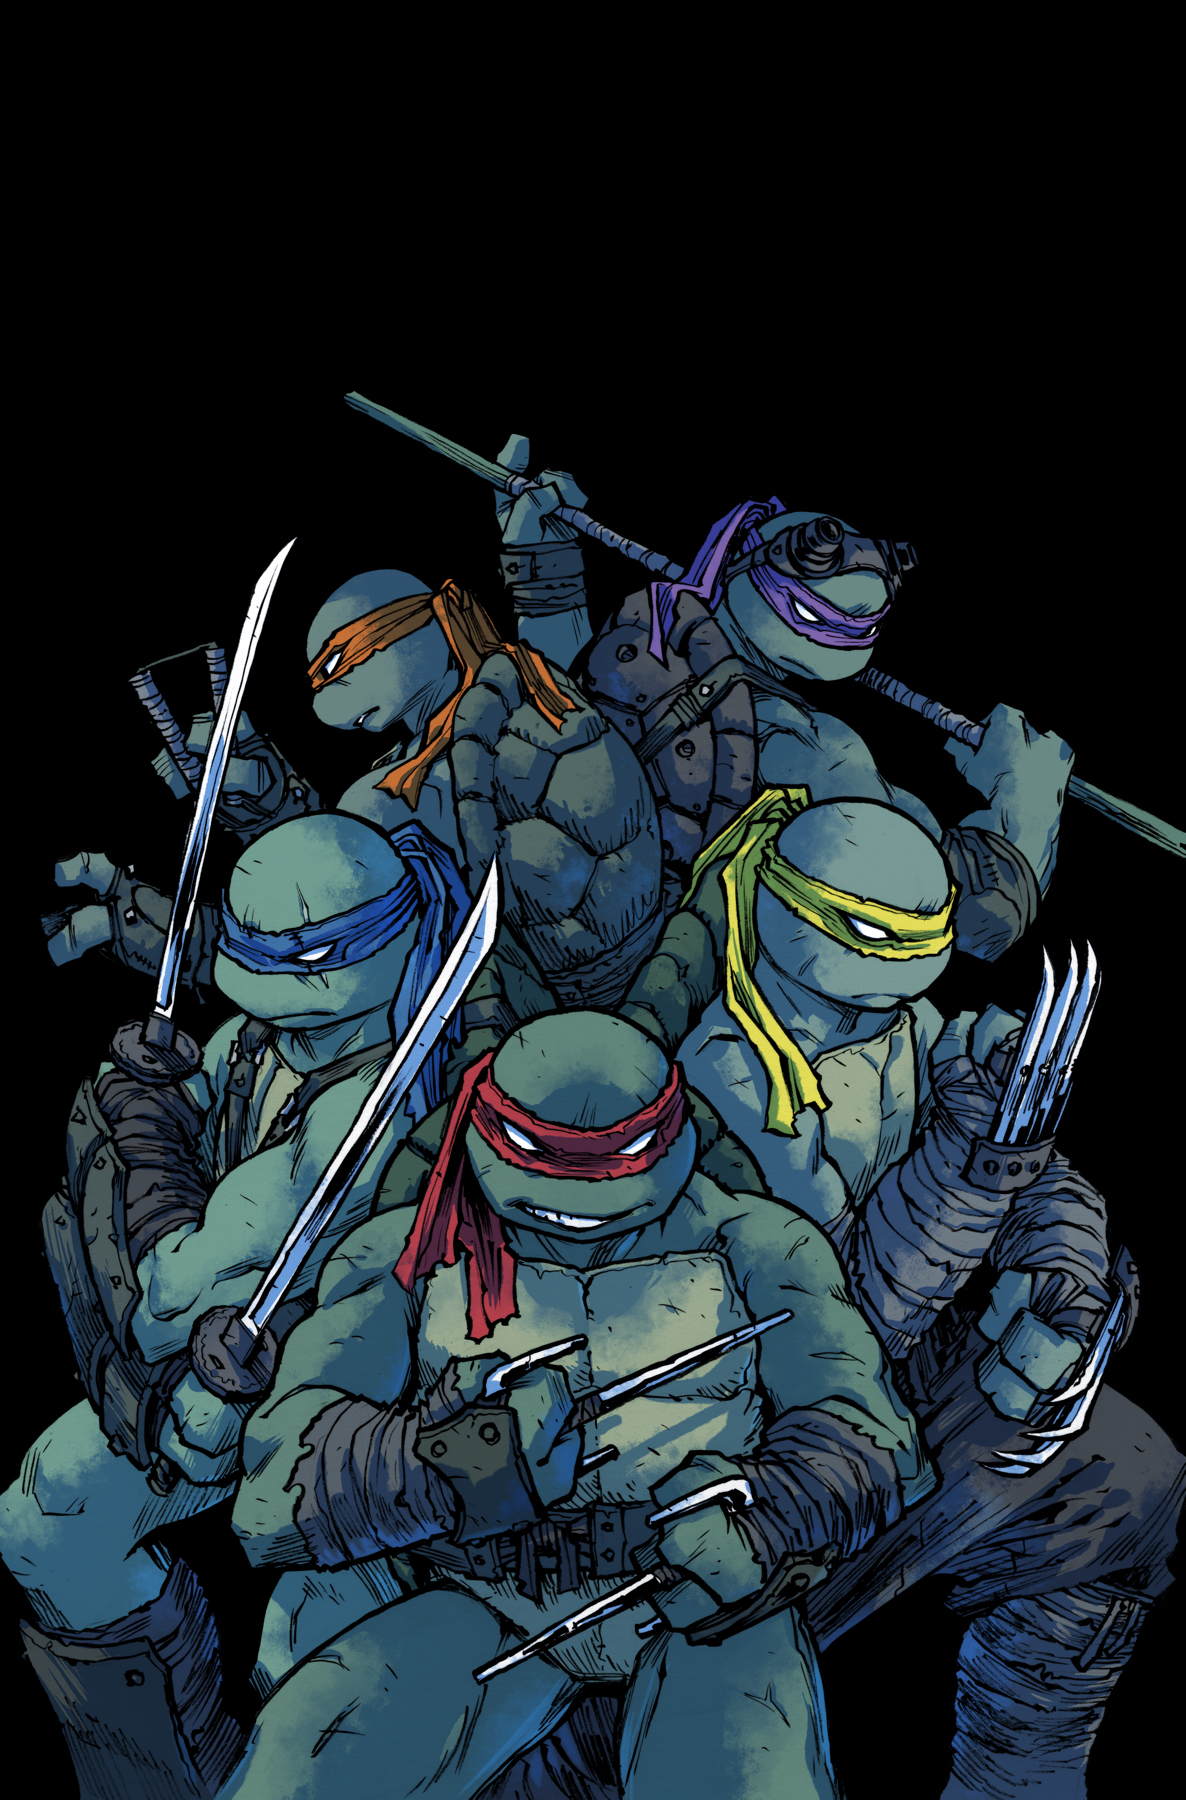 https://static.wikia.nocookie.net/great-characters/images/b/be/Tmnt101.jpg/revision/latest?cb=20201116070308